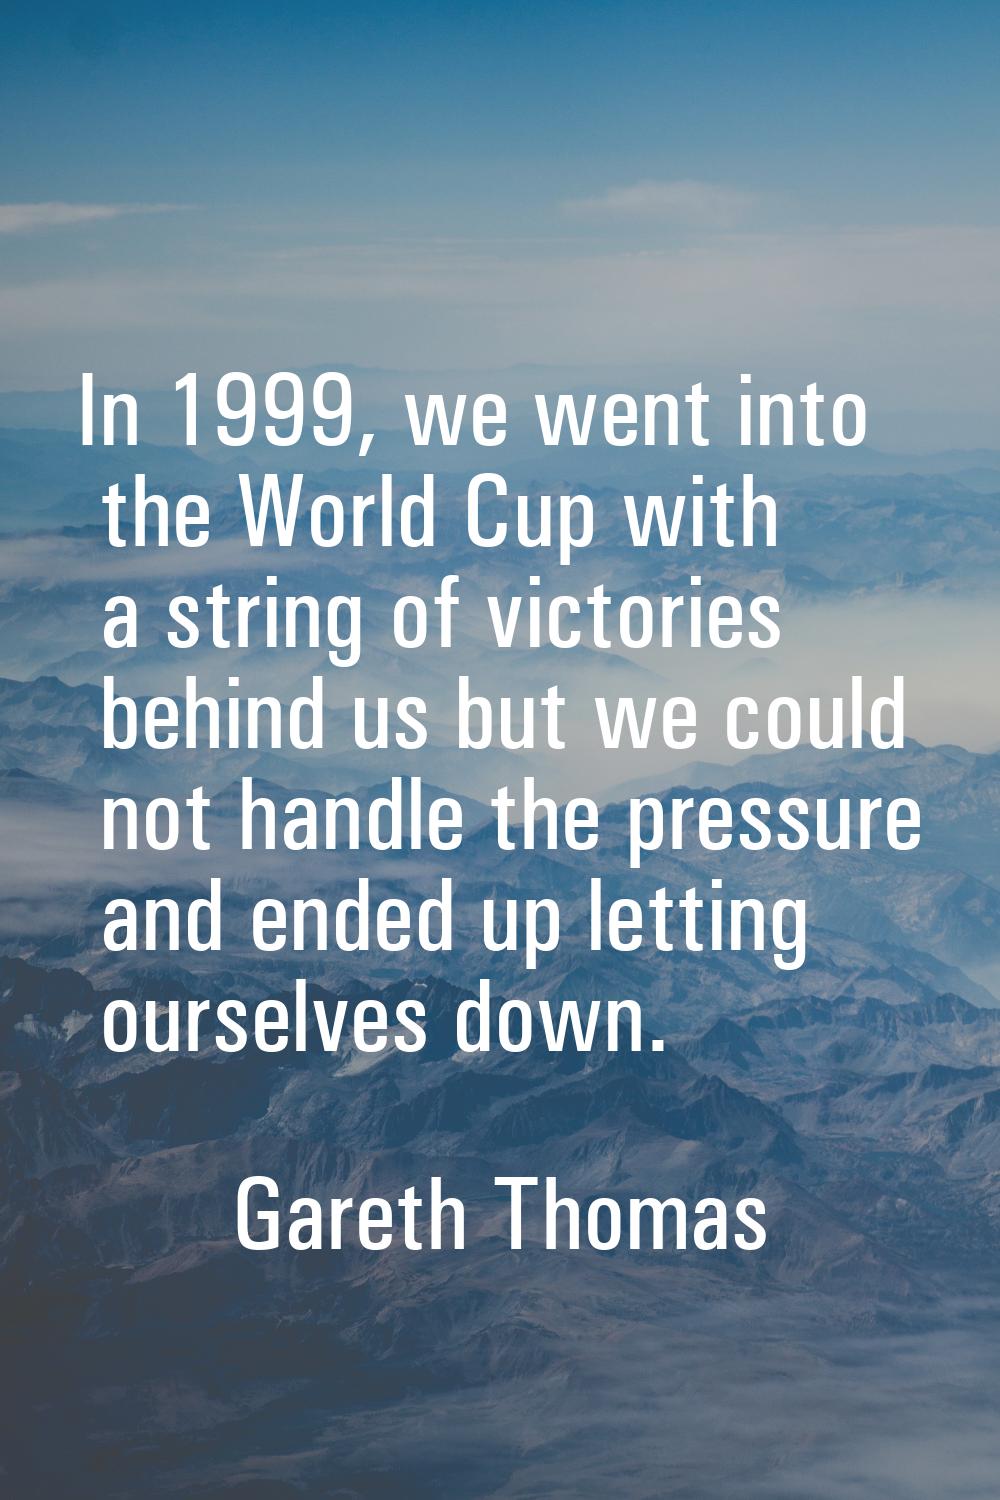 In 1999, we went into the World Cup with a string of victories behind us but we could not handle th